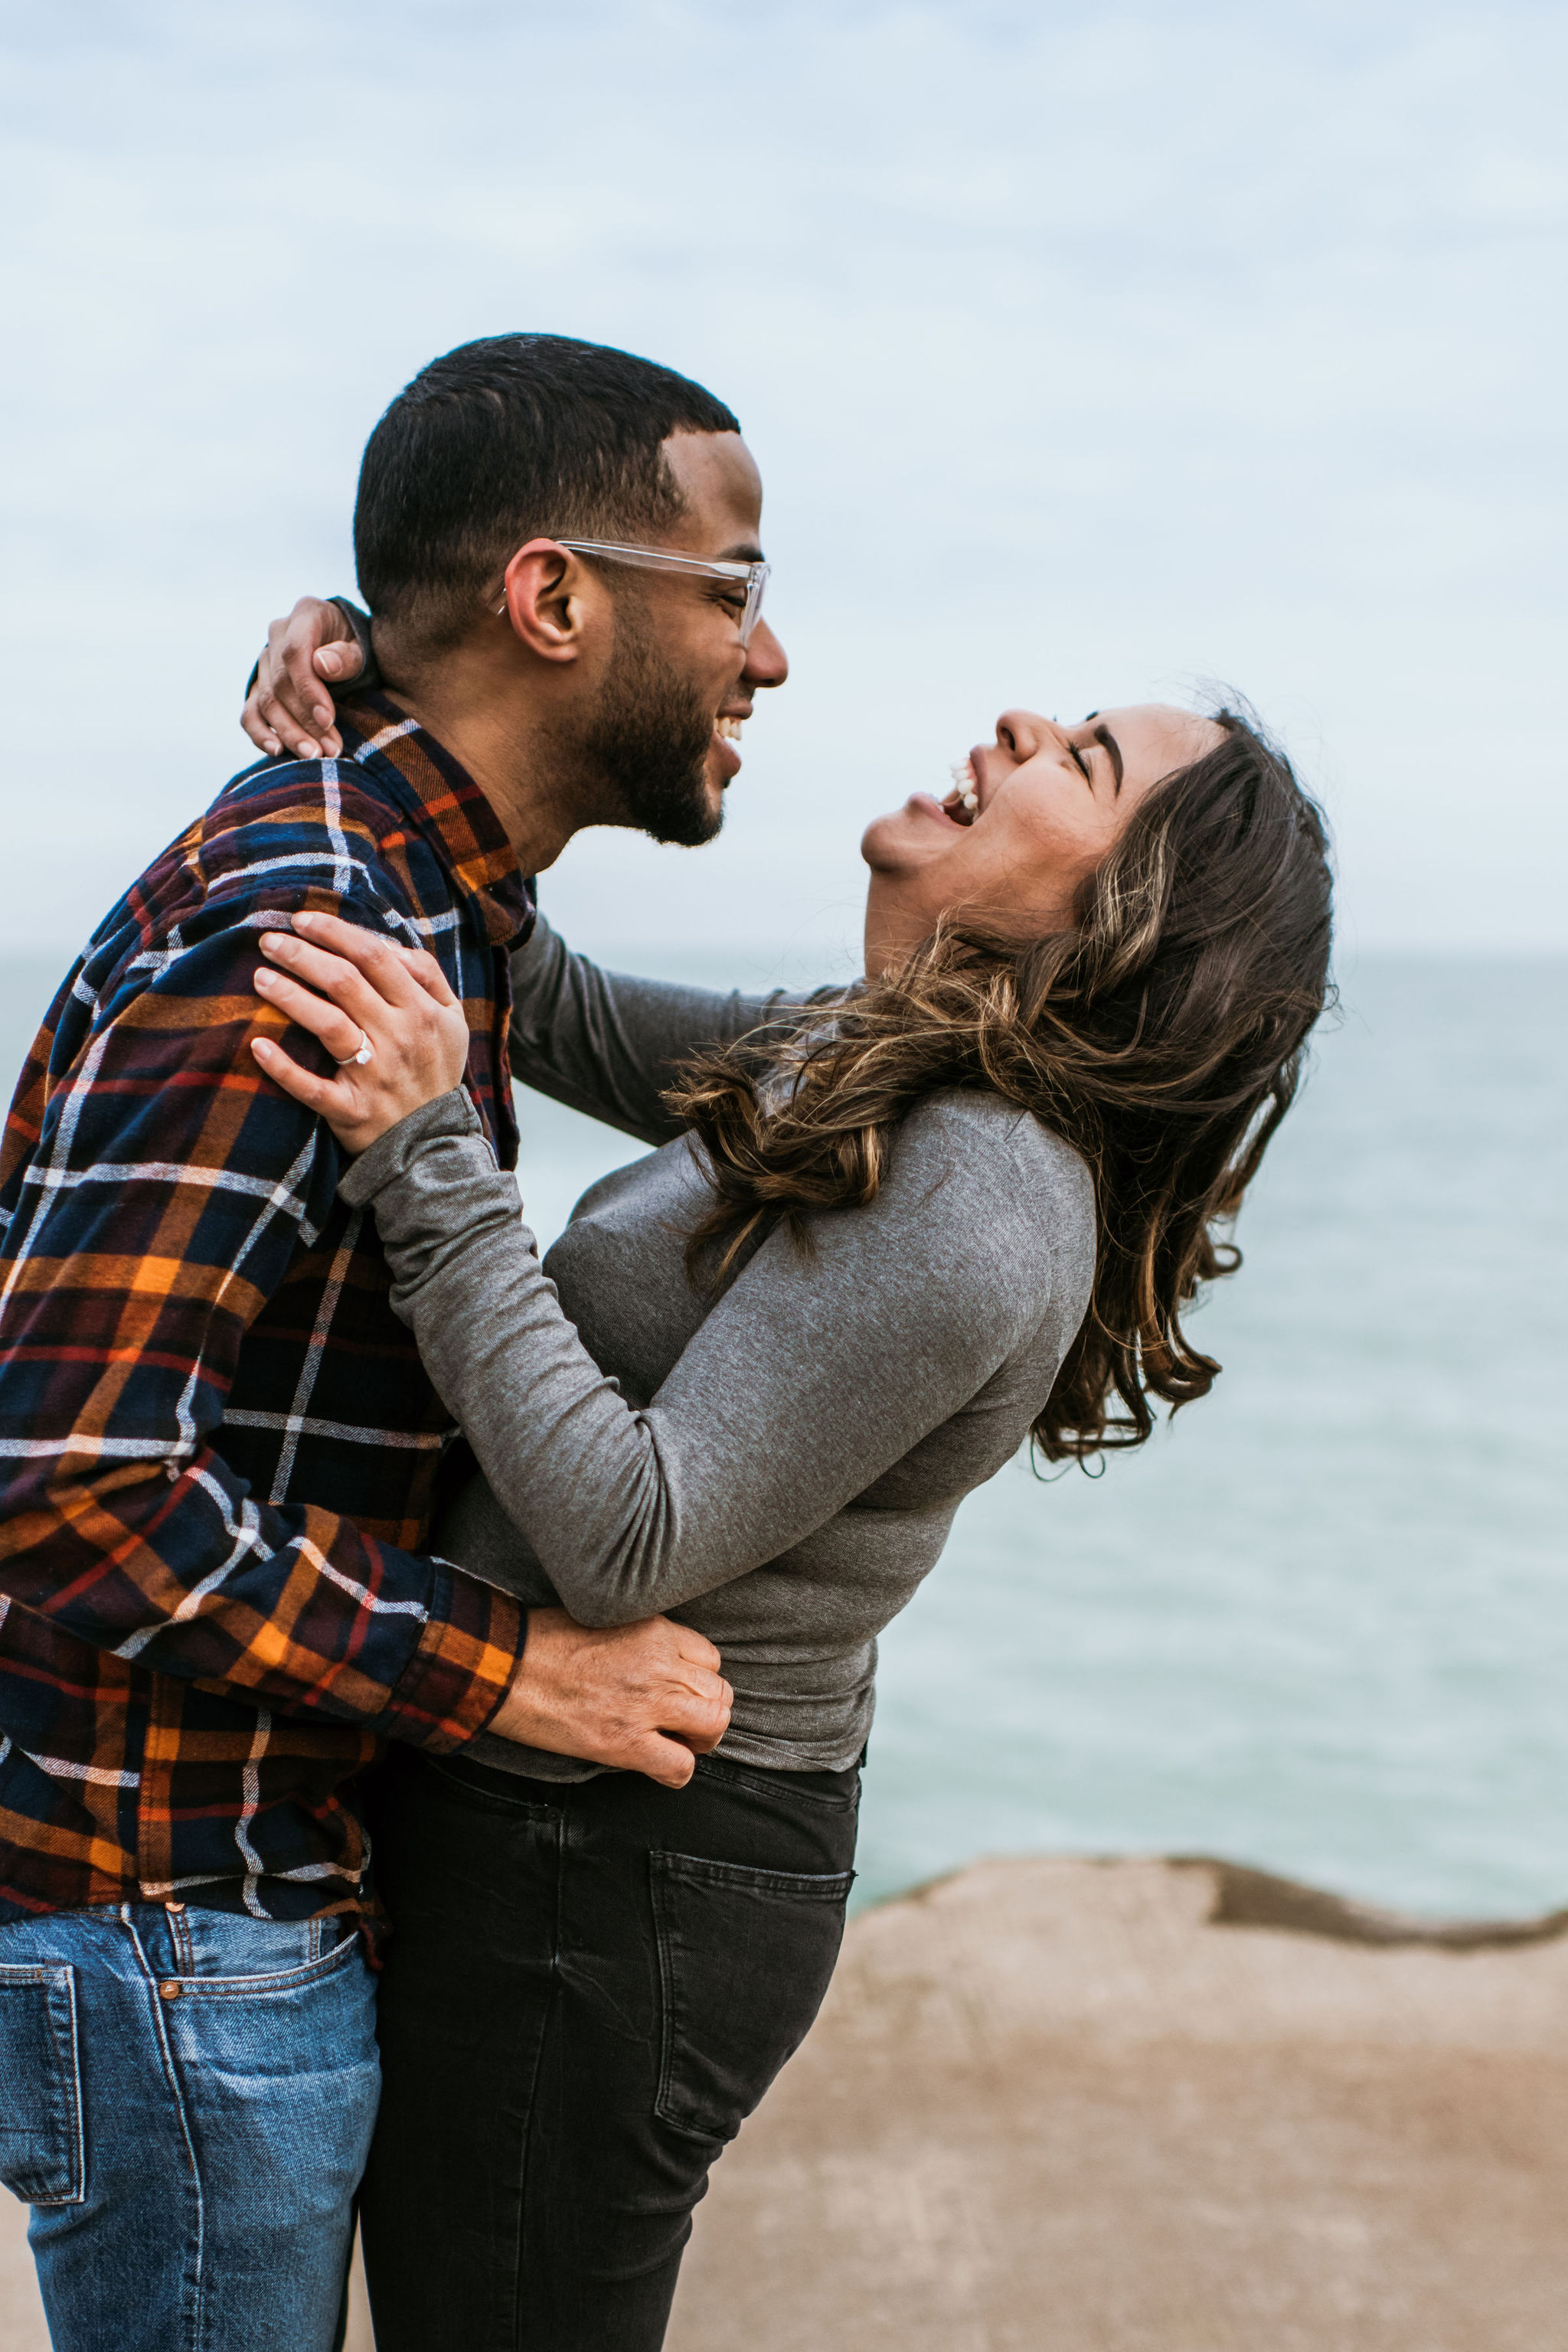 Fullerton Beach, Chicago Illinois Engagement session, Photographs by Teresa. This blog post includes outfit ideas for an outdoor couples session and posing inspiration. Book your Chicago Illinois couples session and browse the blog for inspiration #engagement #photography #engagementphotography #chicagophotographer